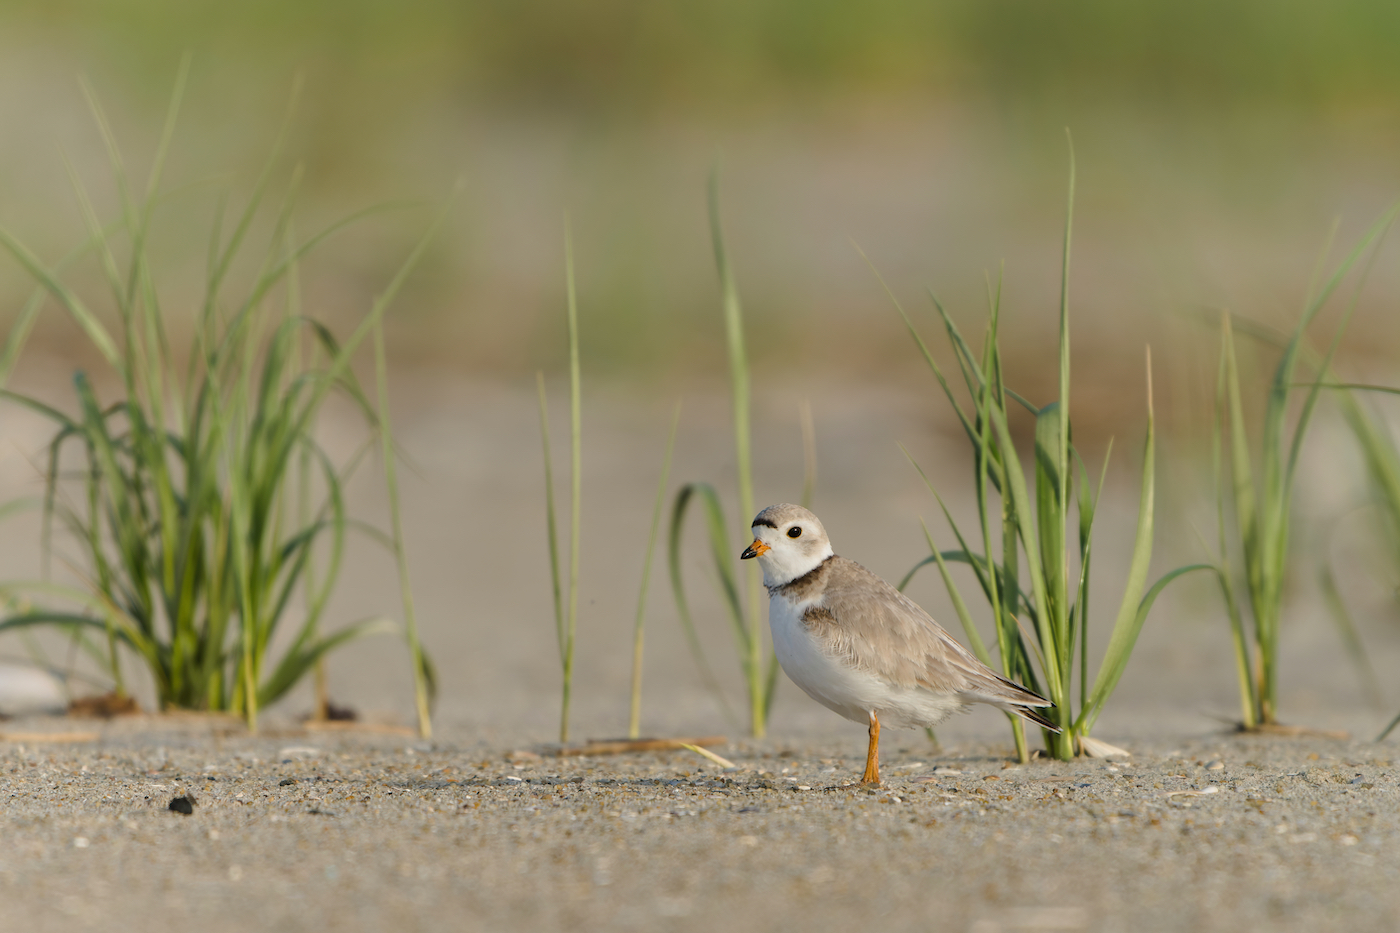 A plover with an orange beak and filled out brown feathers on its back stands alert in the sand with green grass blades sticking up behind it.